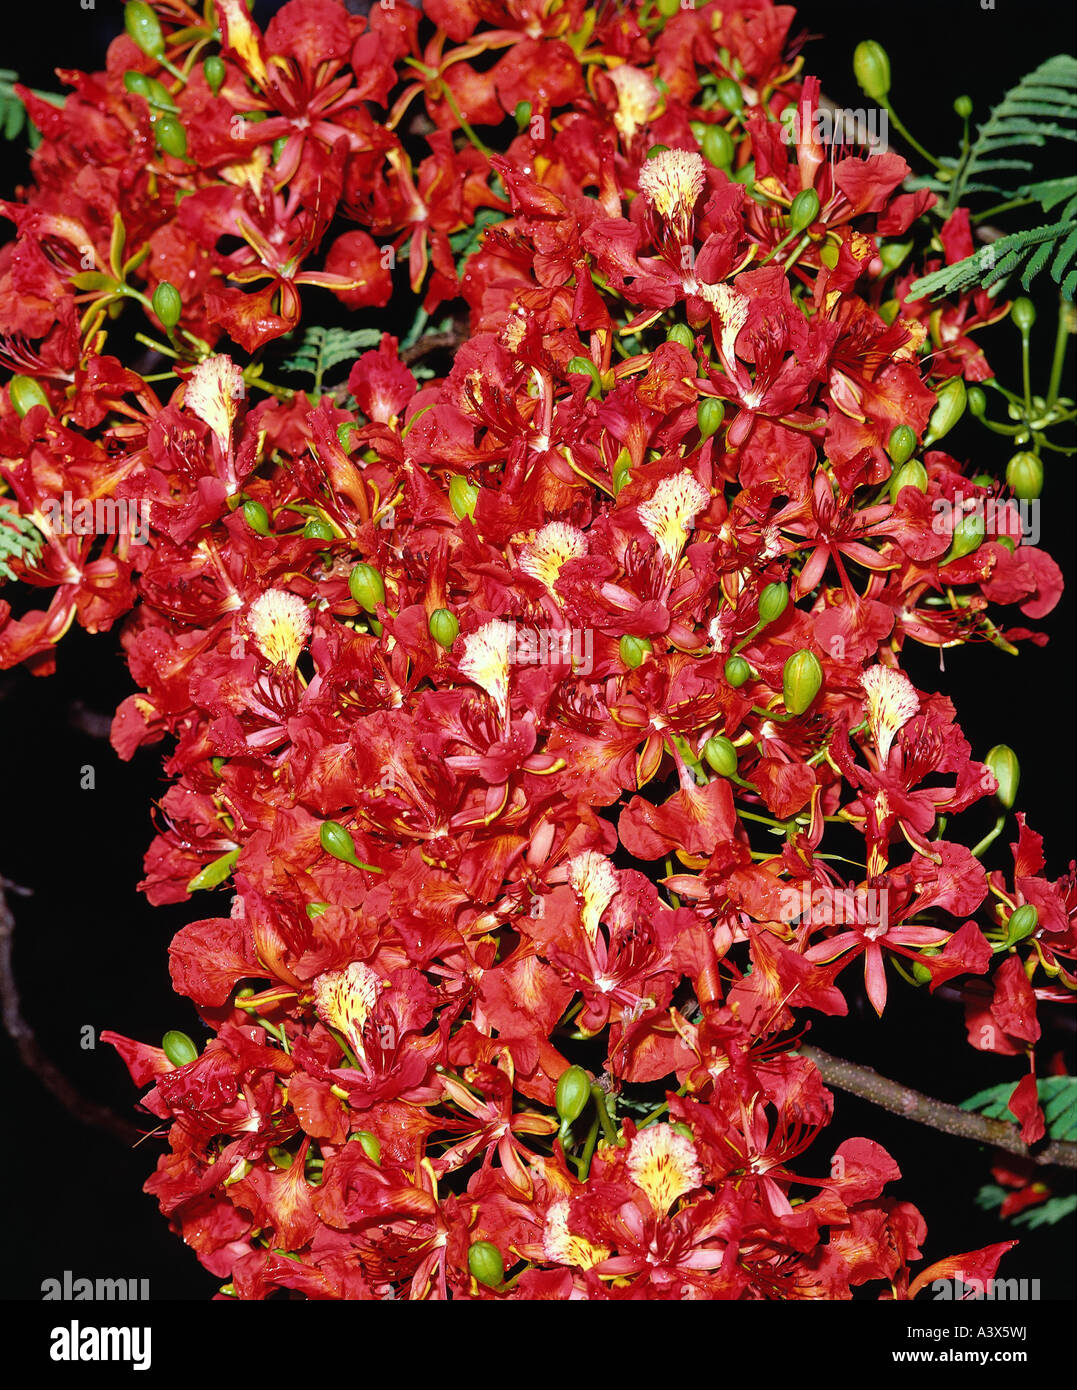 botany, Delonix, Delonix regia, blossoms and buds, red, blooming, blossom, Fabaceae, Poinciana, Leguminosae, Fabales, Rosidae, C Stock Photo